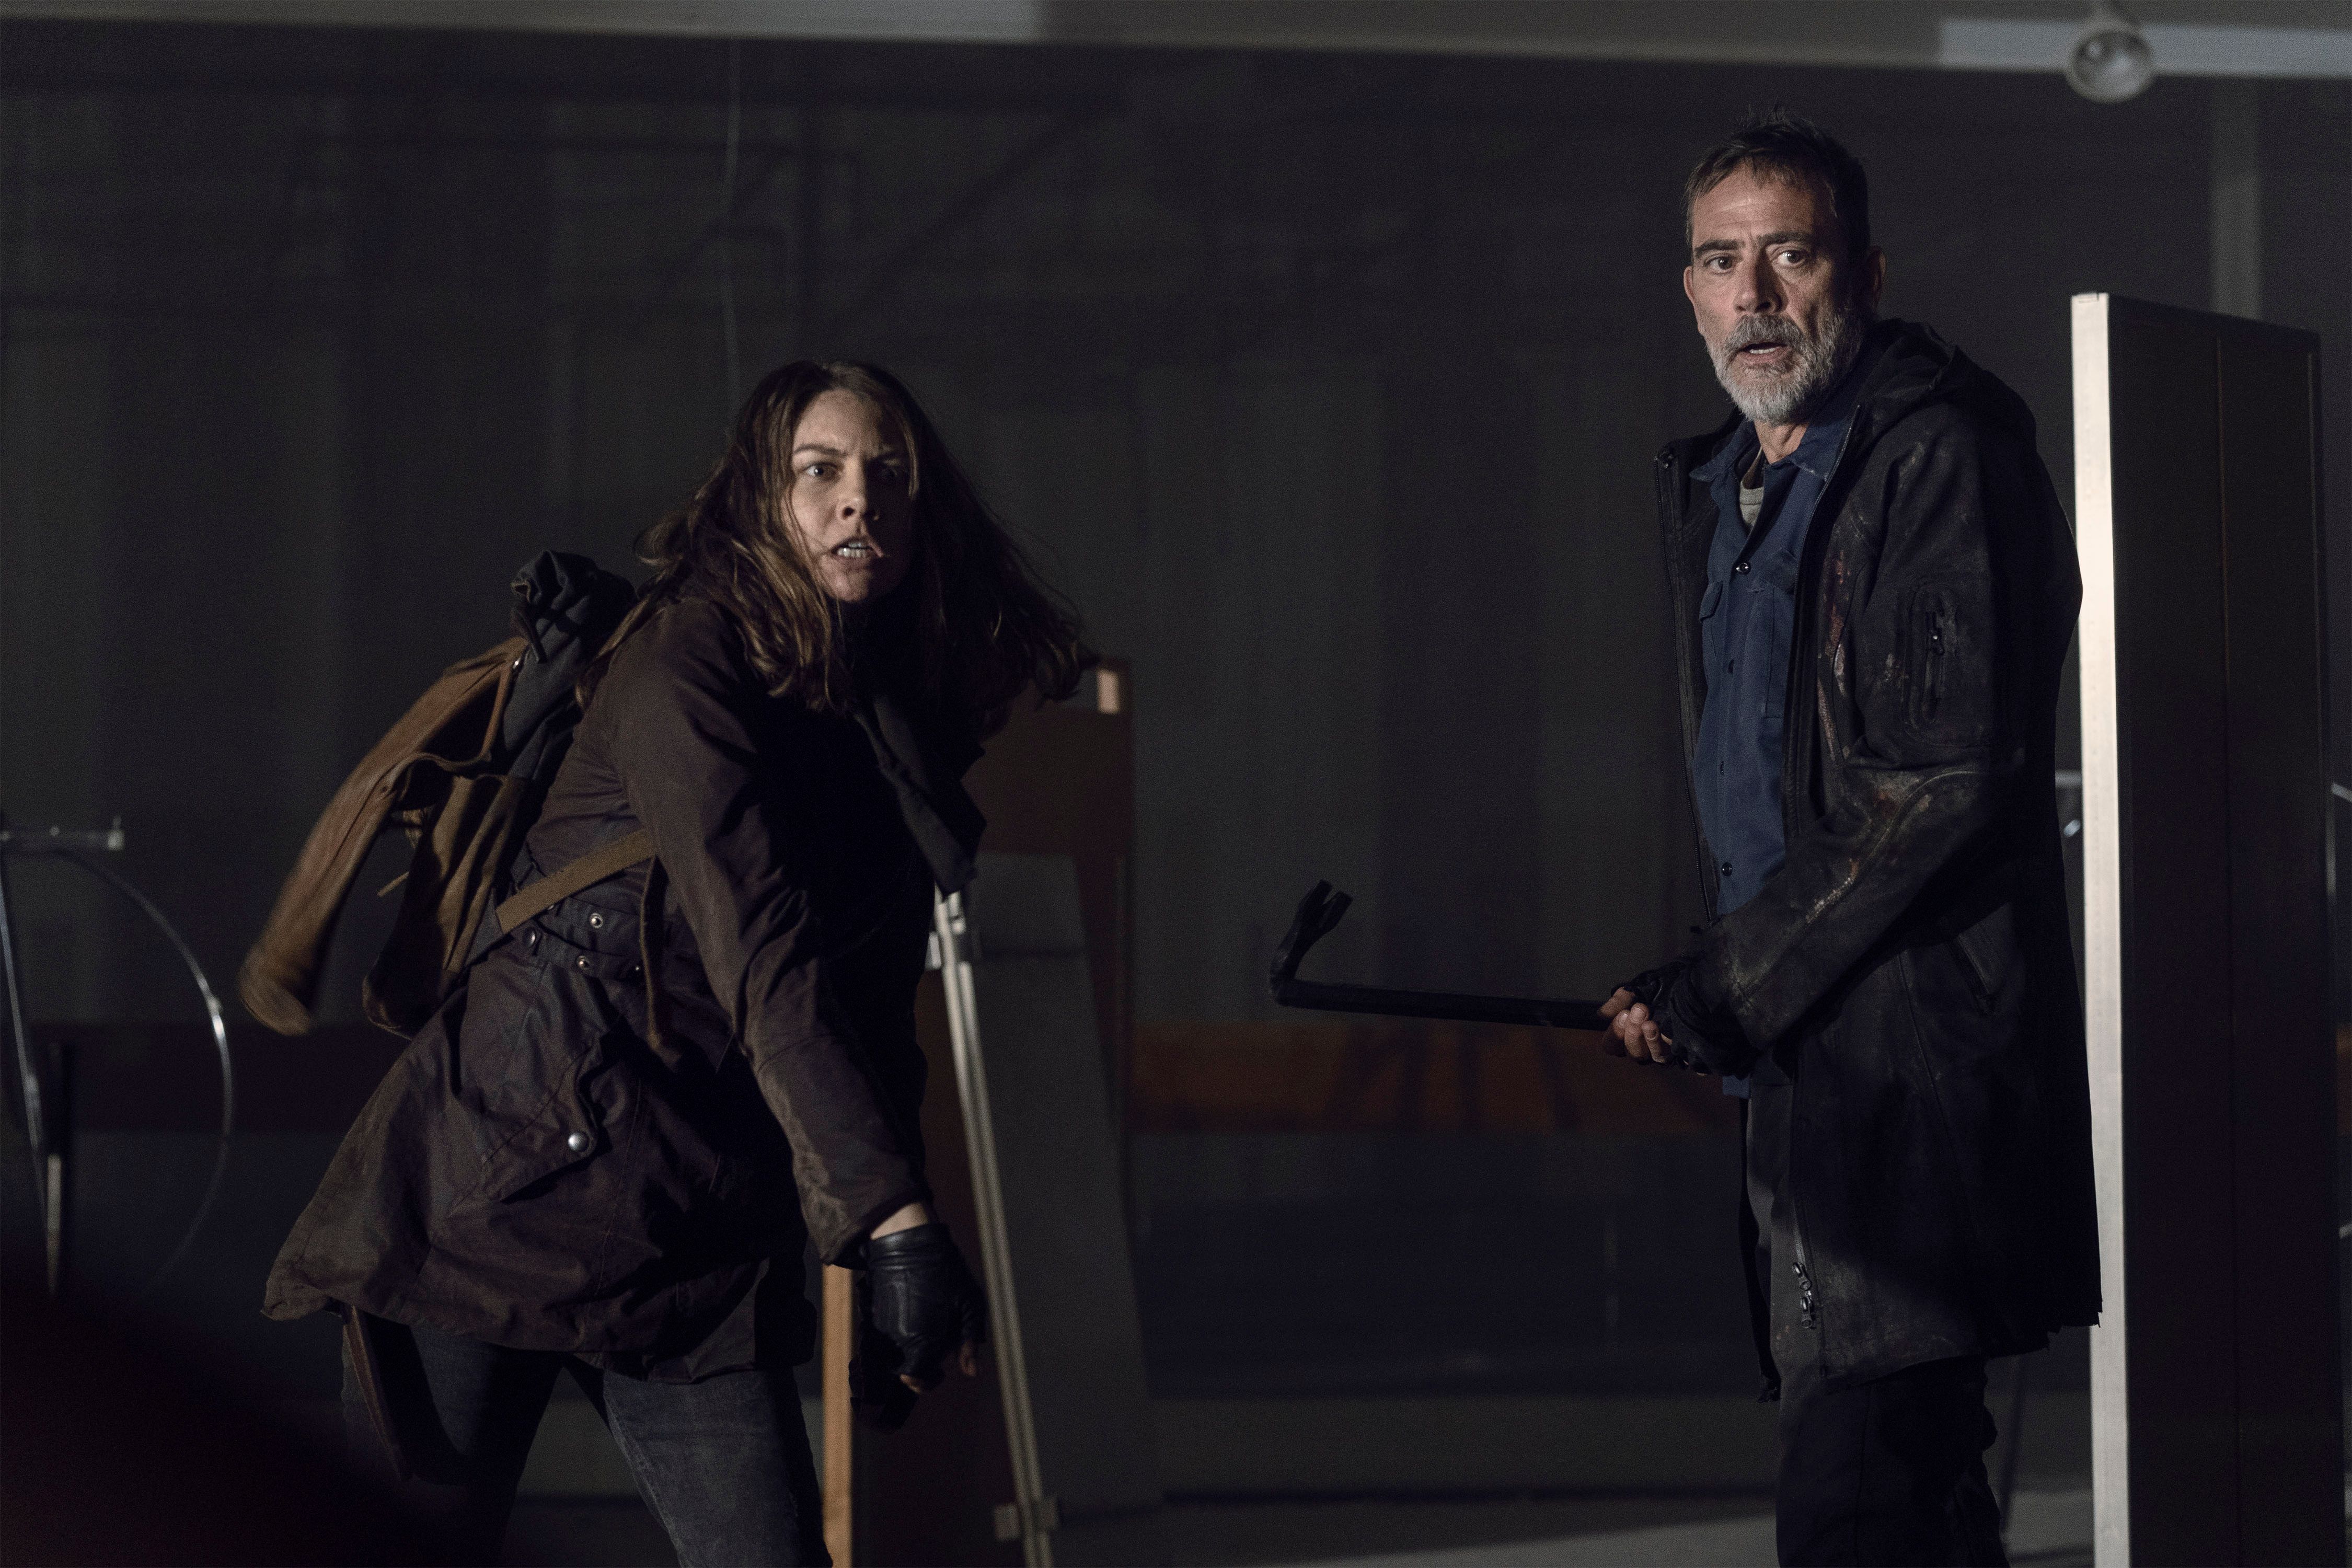 Maggie And Negan Are Ready For Action On The Walking Dead